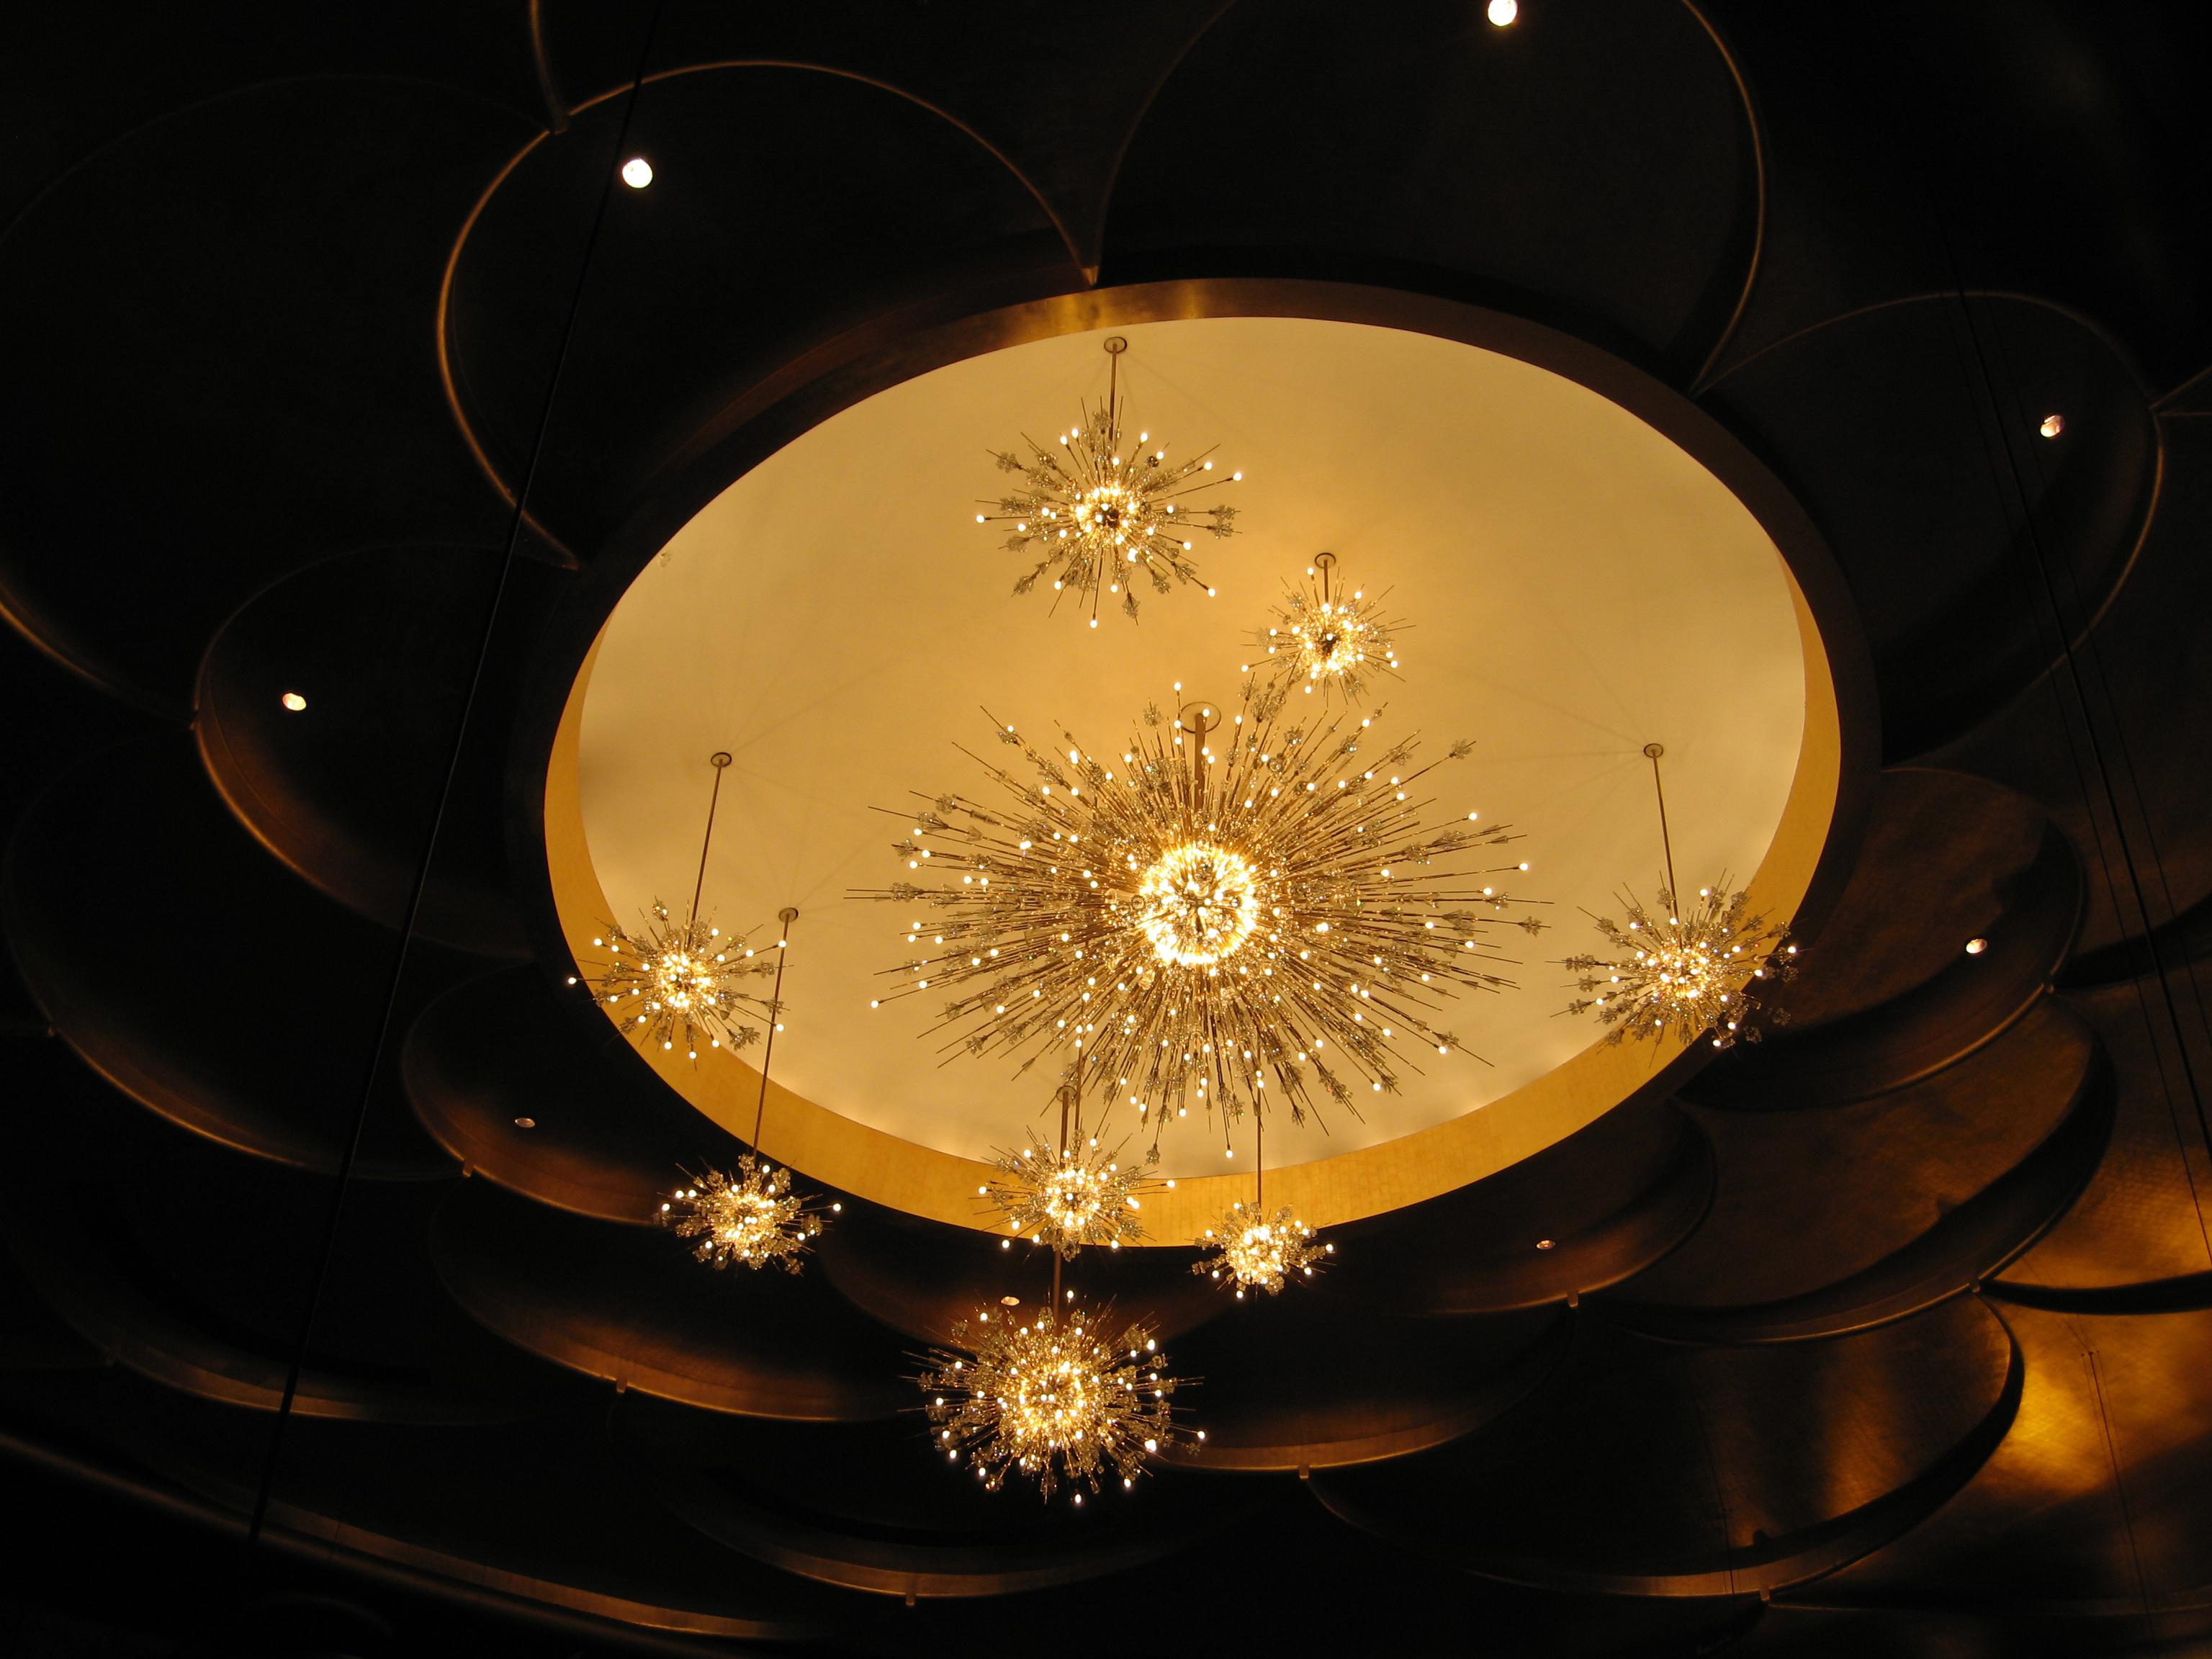 Lobmeyr Metropolitan Opera Crystal Chandelier Auditorium 6660-L-30 In New Condition For Sale In New York, NY